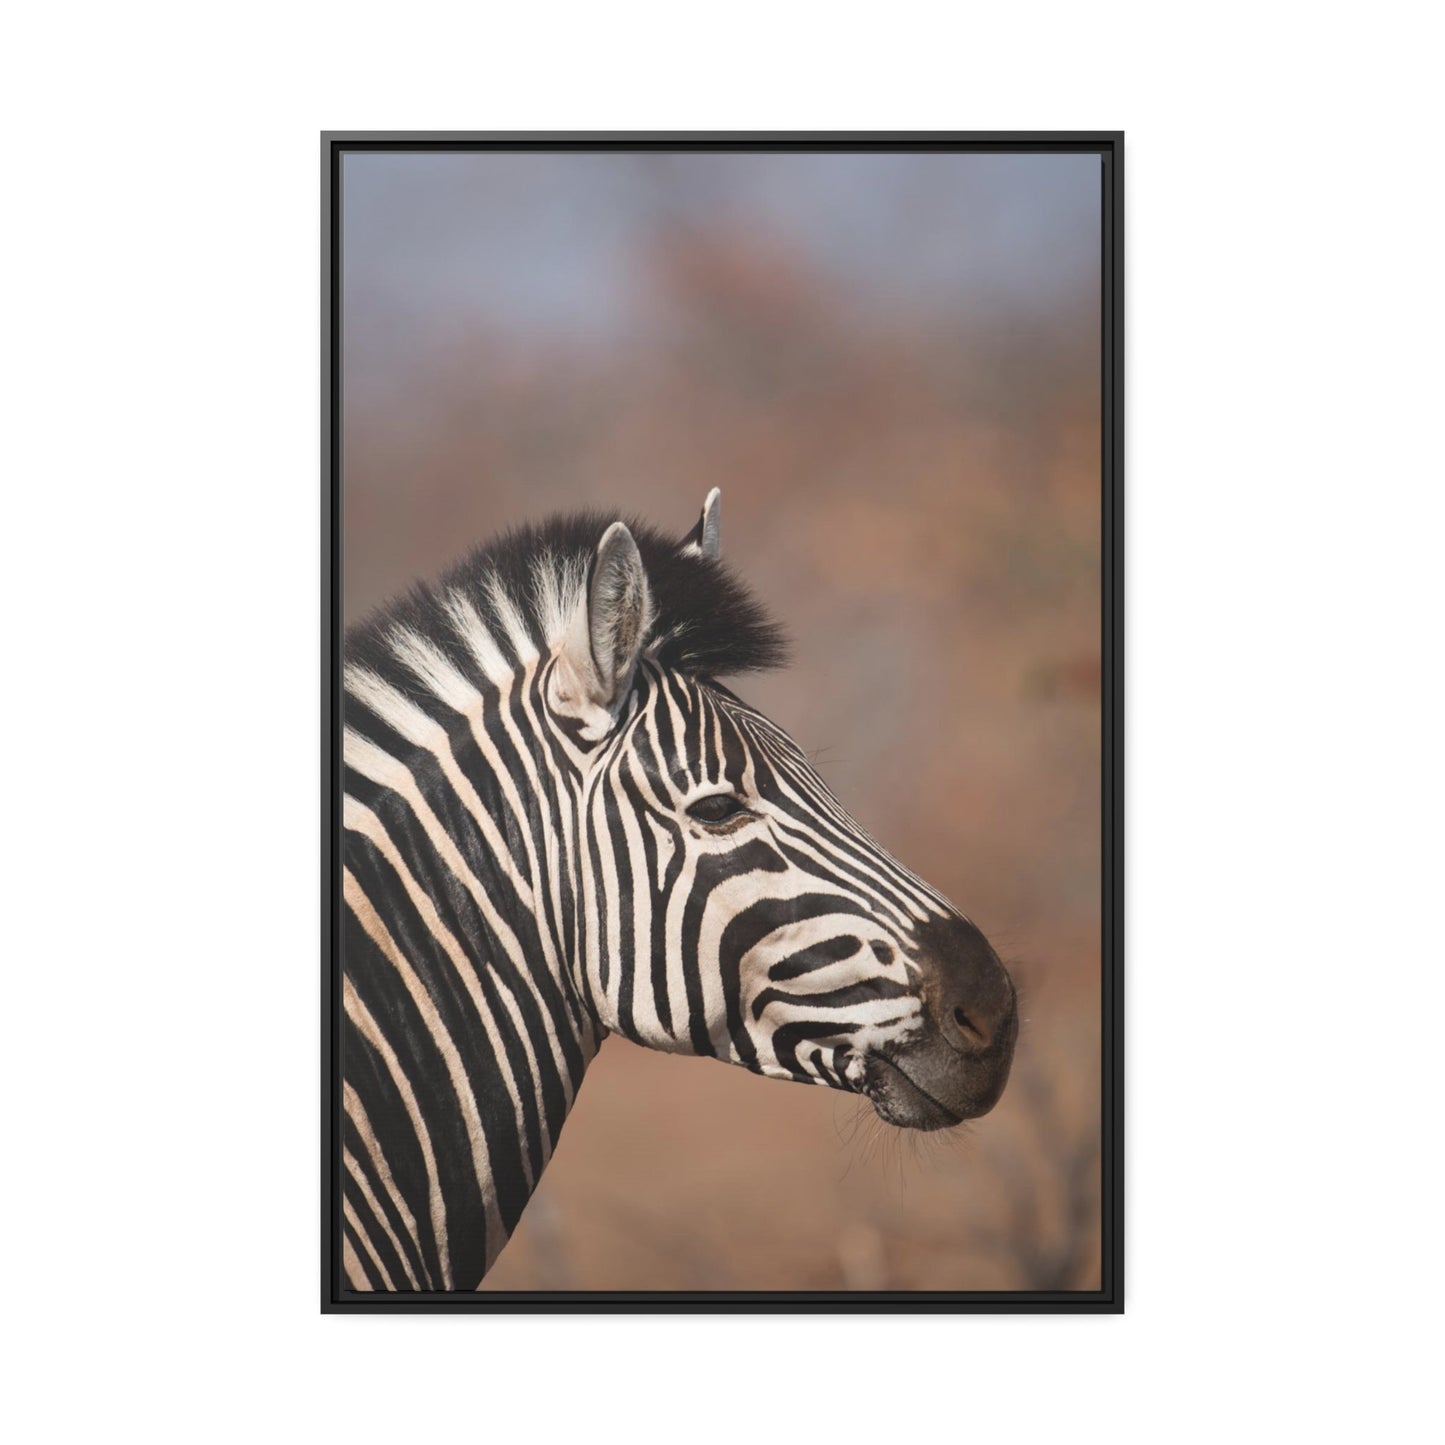 Wild Beauty: Natural Canvas and Framed Poster Featuring a Majestic Zebra